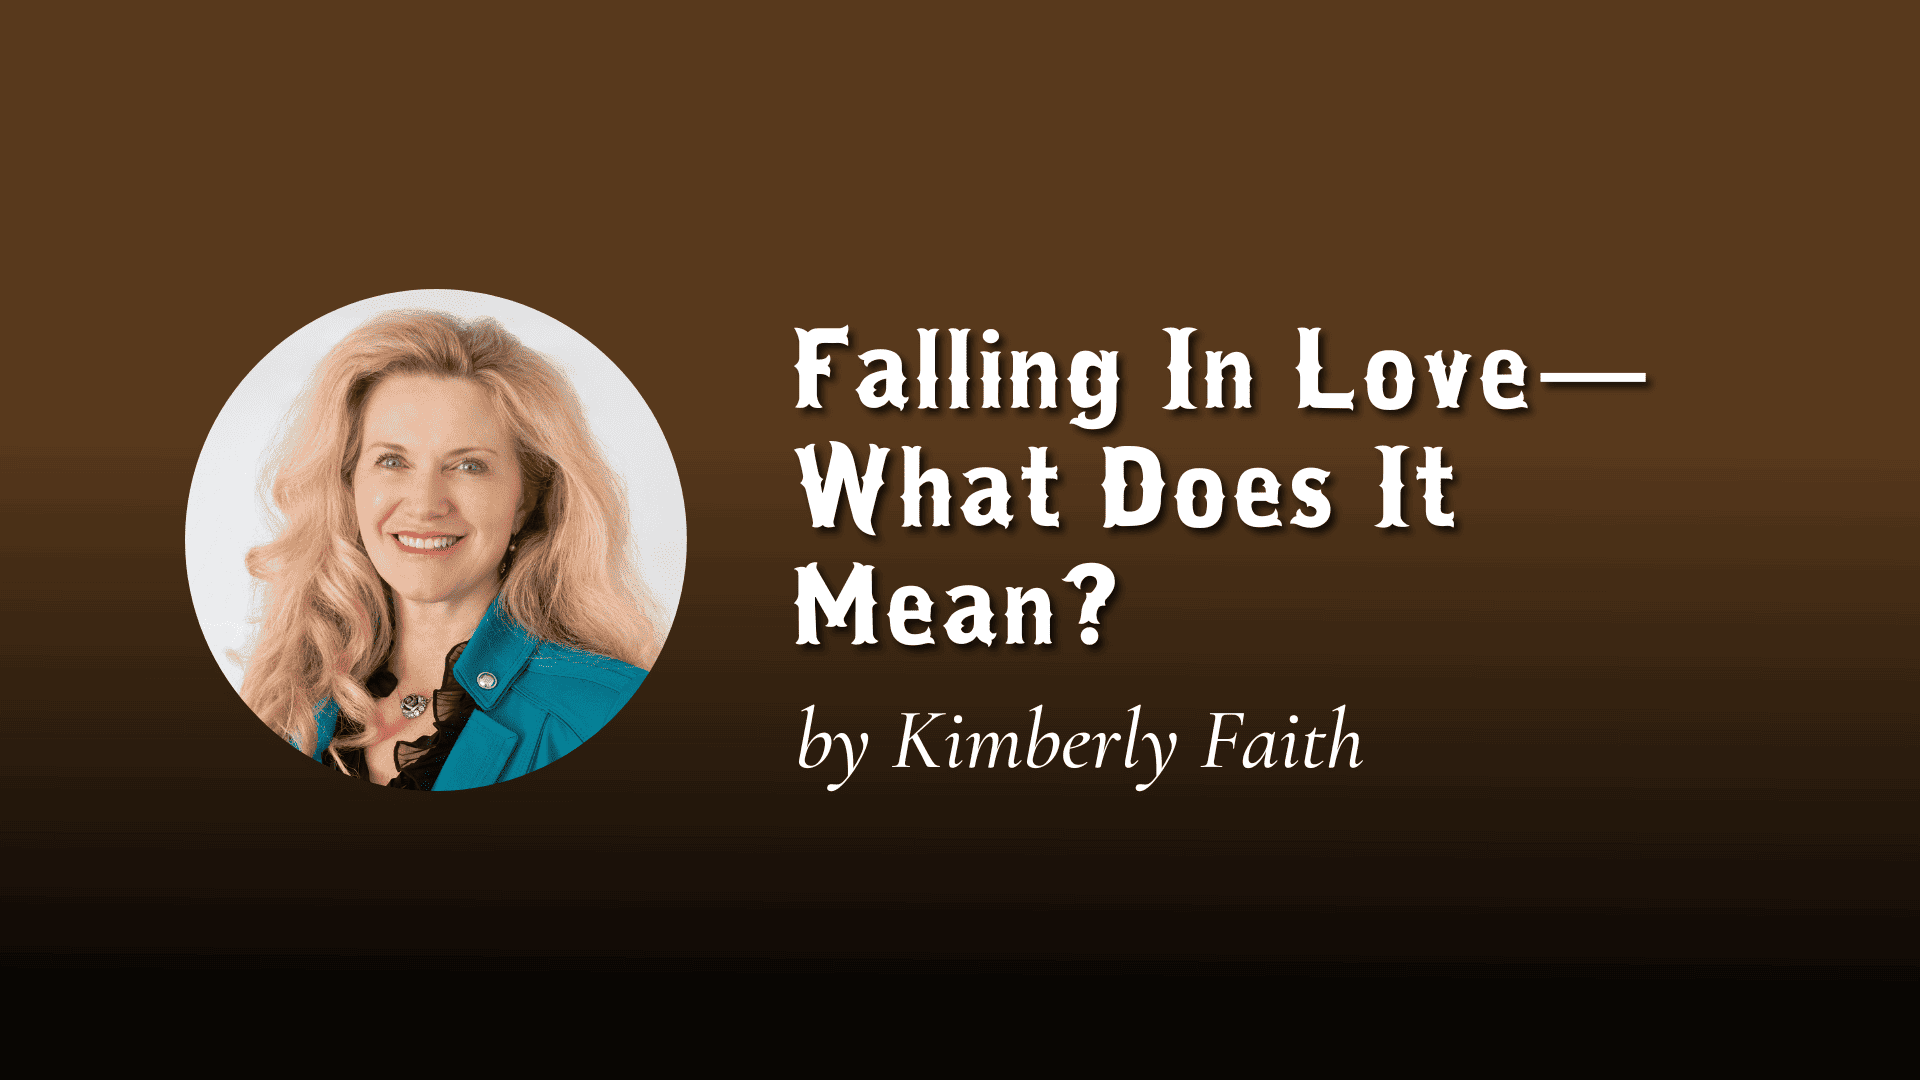 Falling In Love—What Does It Mean